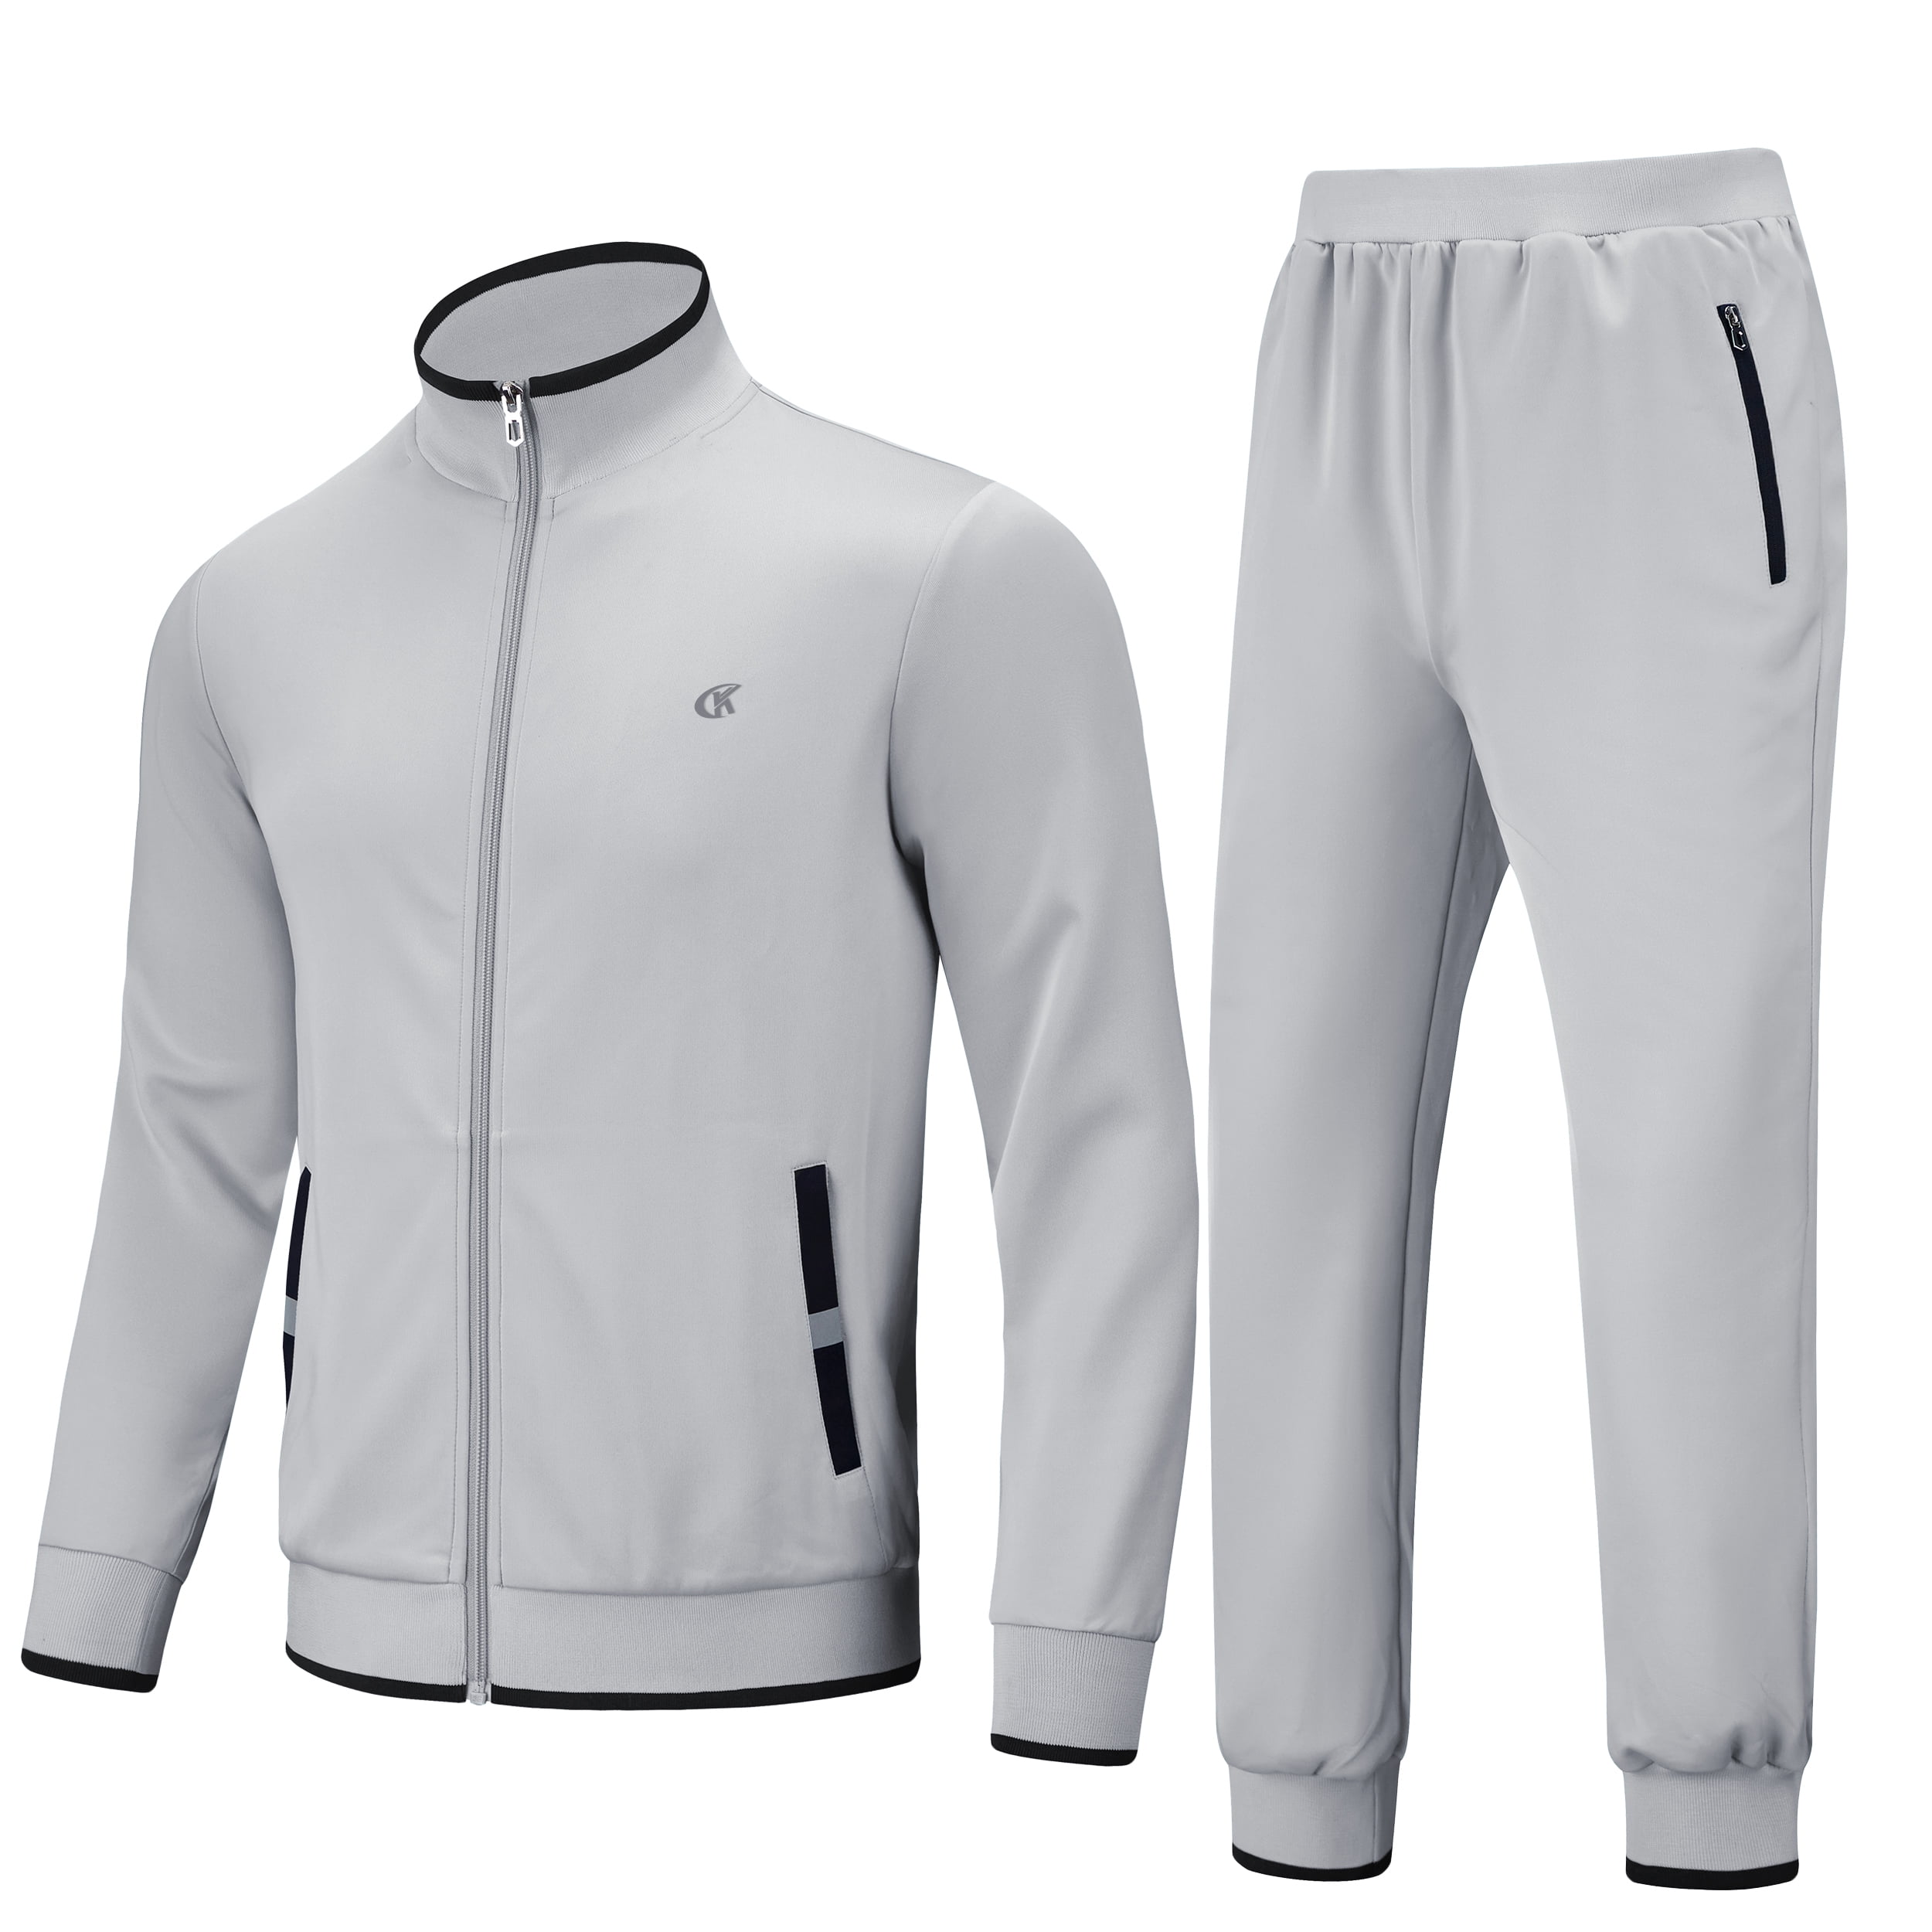 Pdbokew Men's Tracksuits Sweatsuits for Men Set Track Suits 2 Piece ...